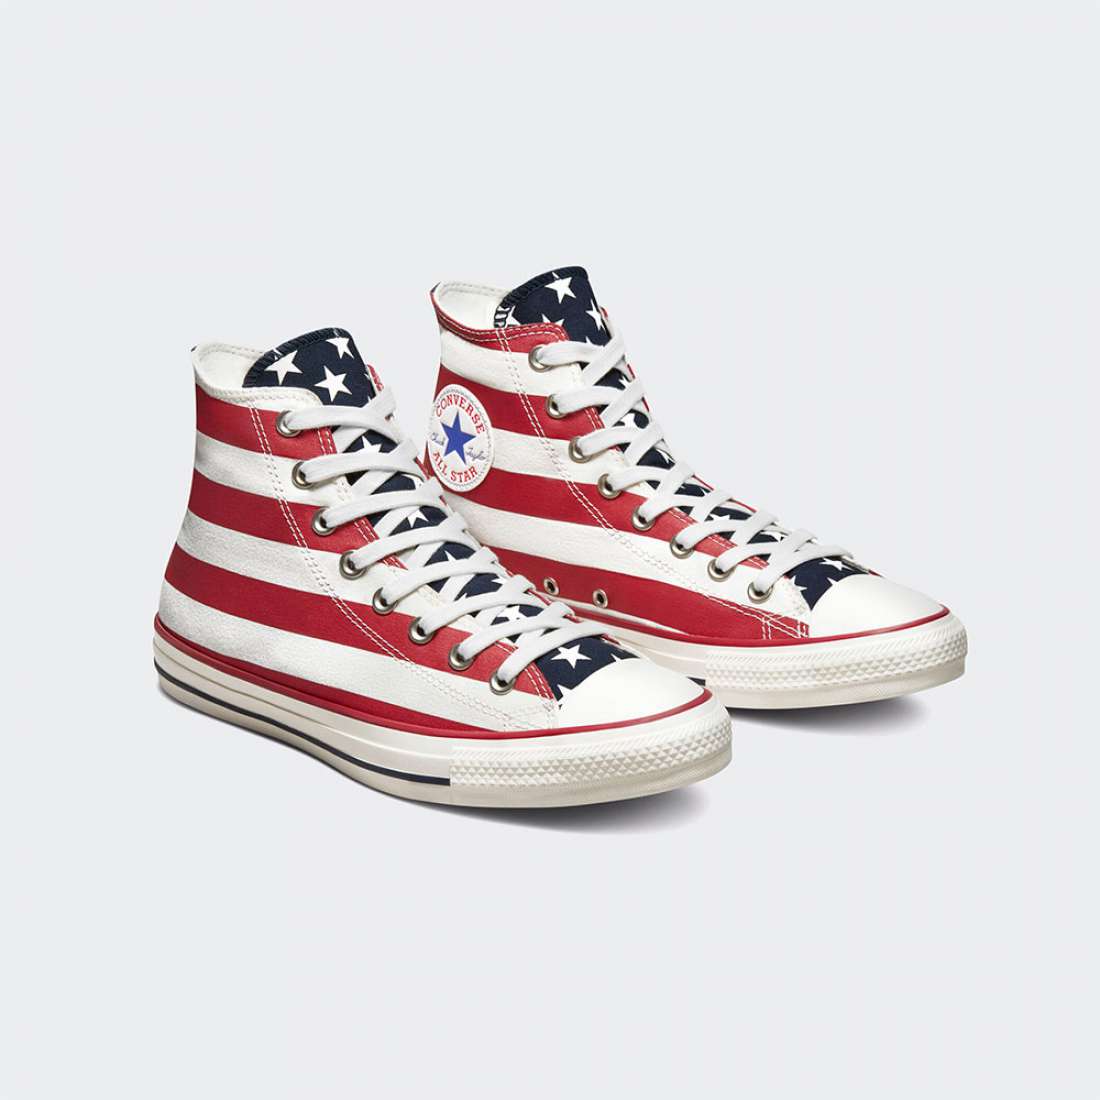 CONVERSE CHUCK TAYLOR ALL STAR RED/WHITE/BLUE